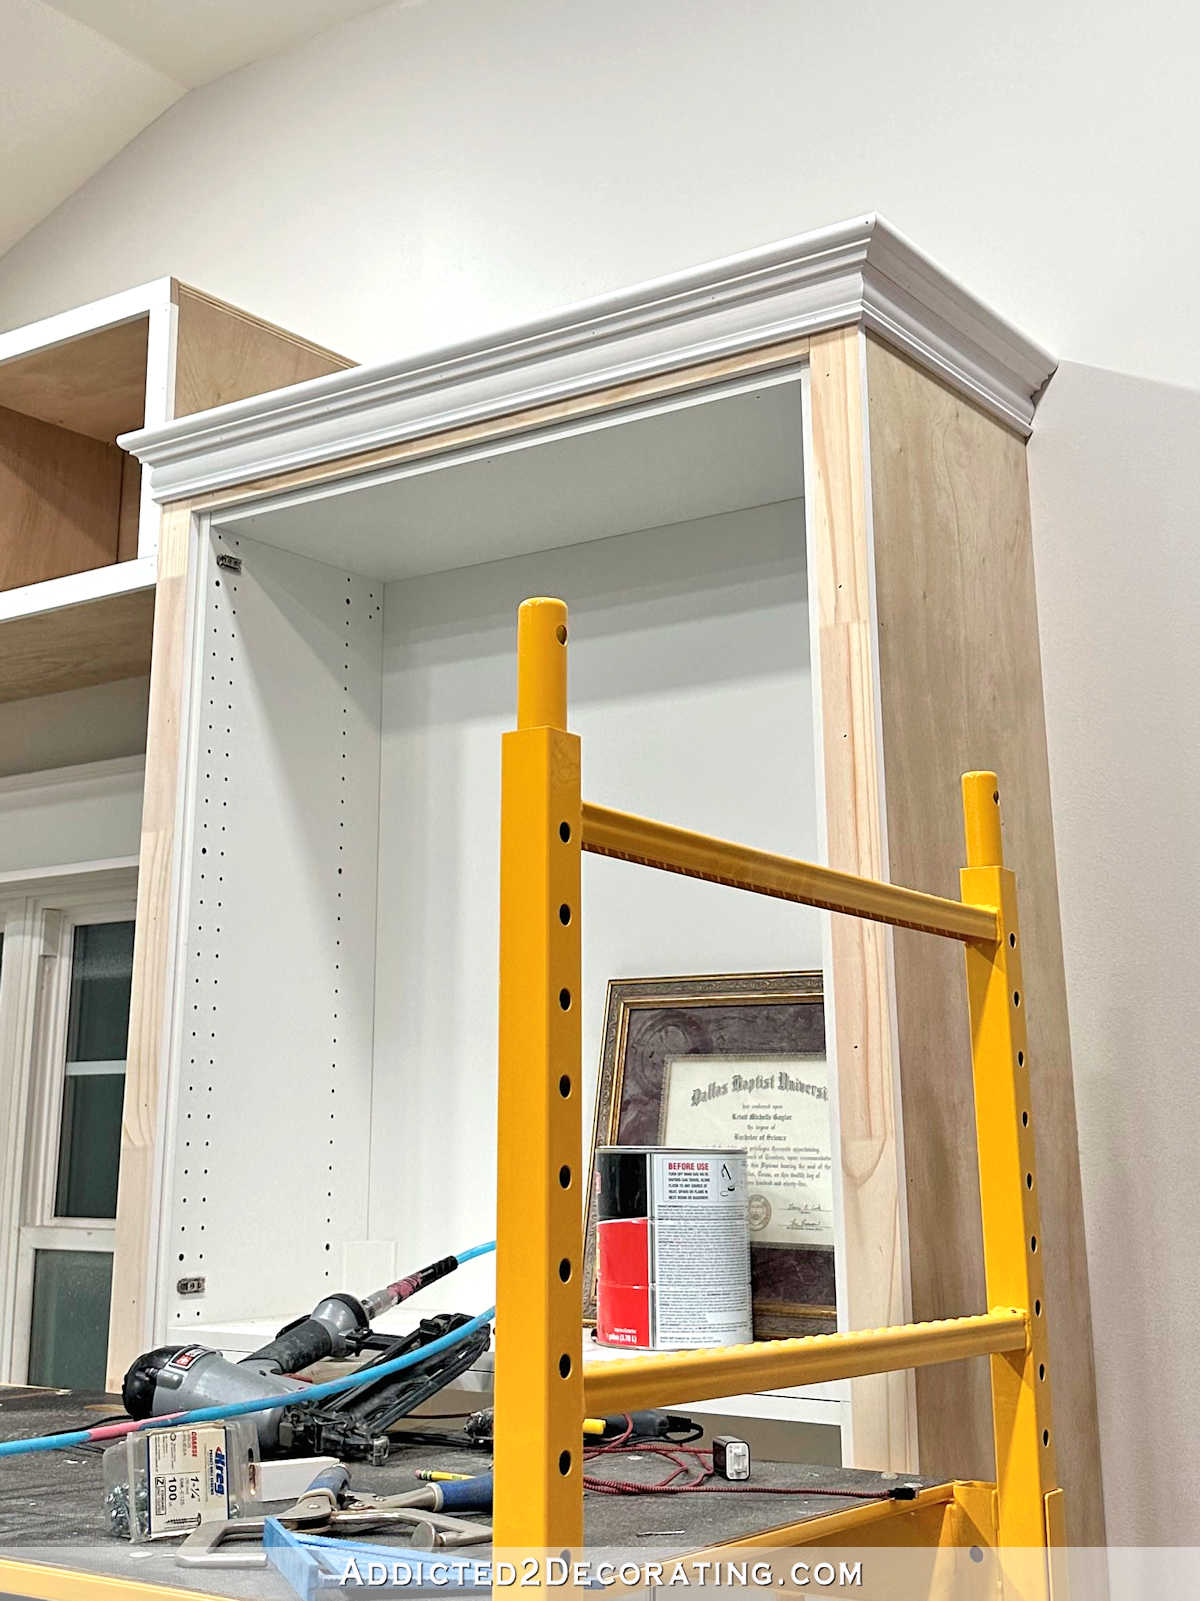 Studio Office Cabinet Progress — How To Make Faux Crown Molding That’s Very Easy To Cut And Install